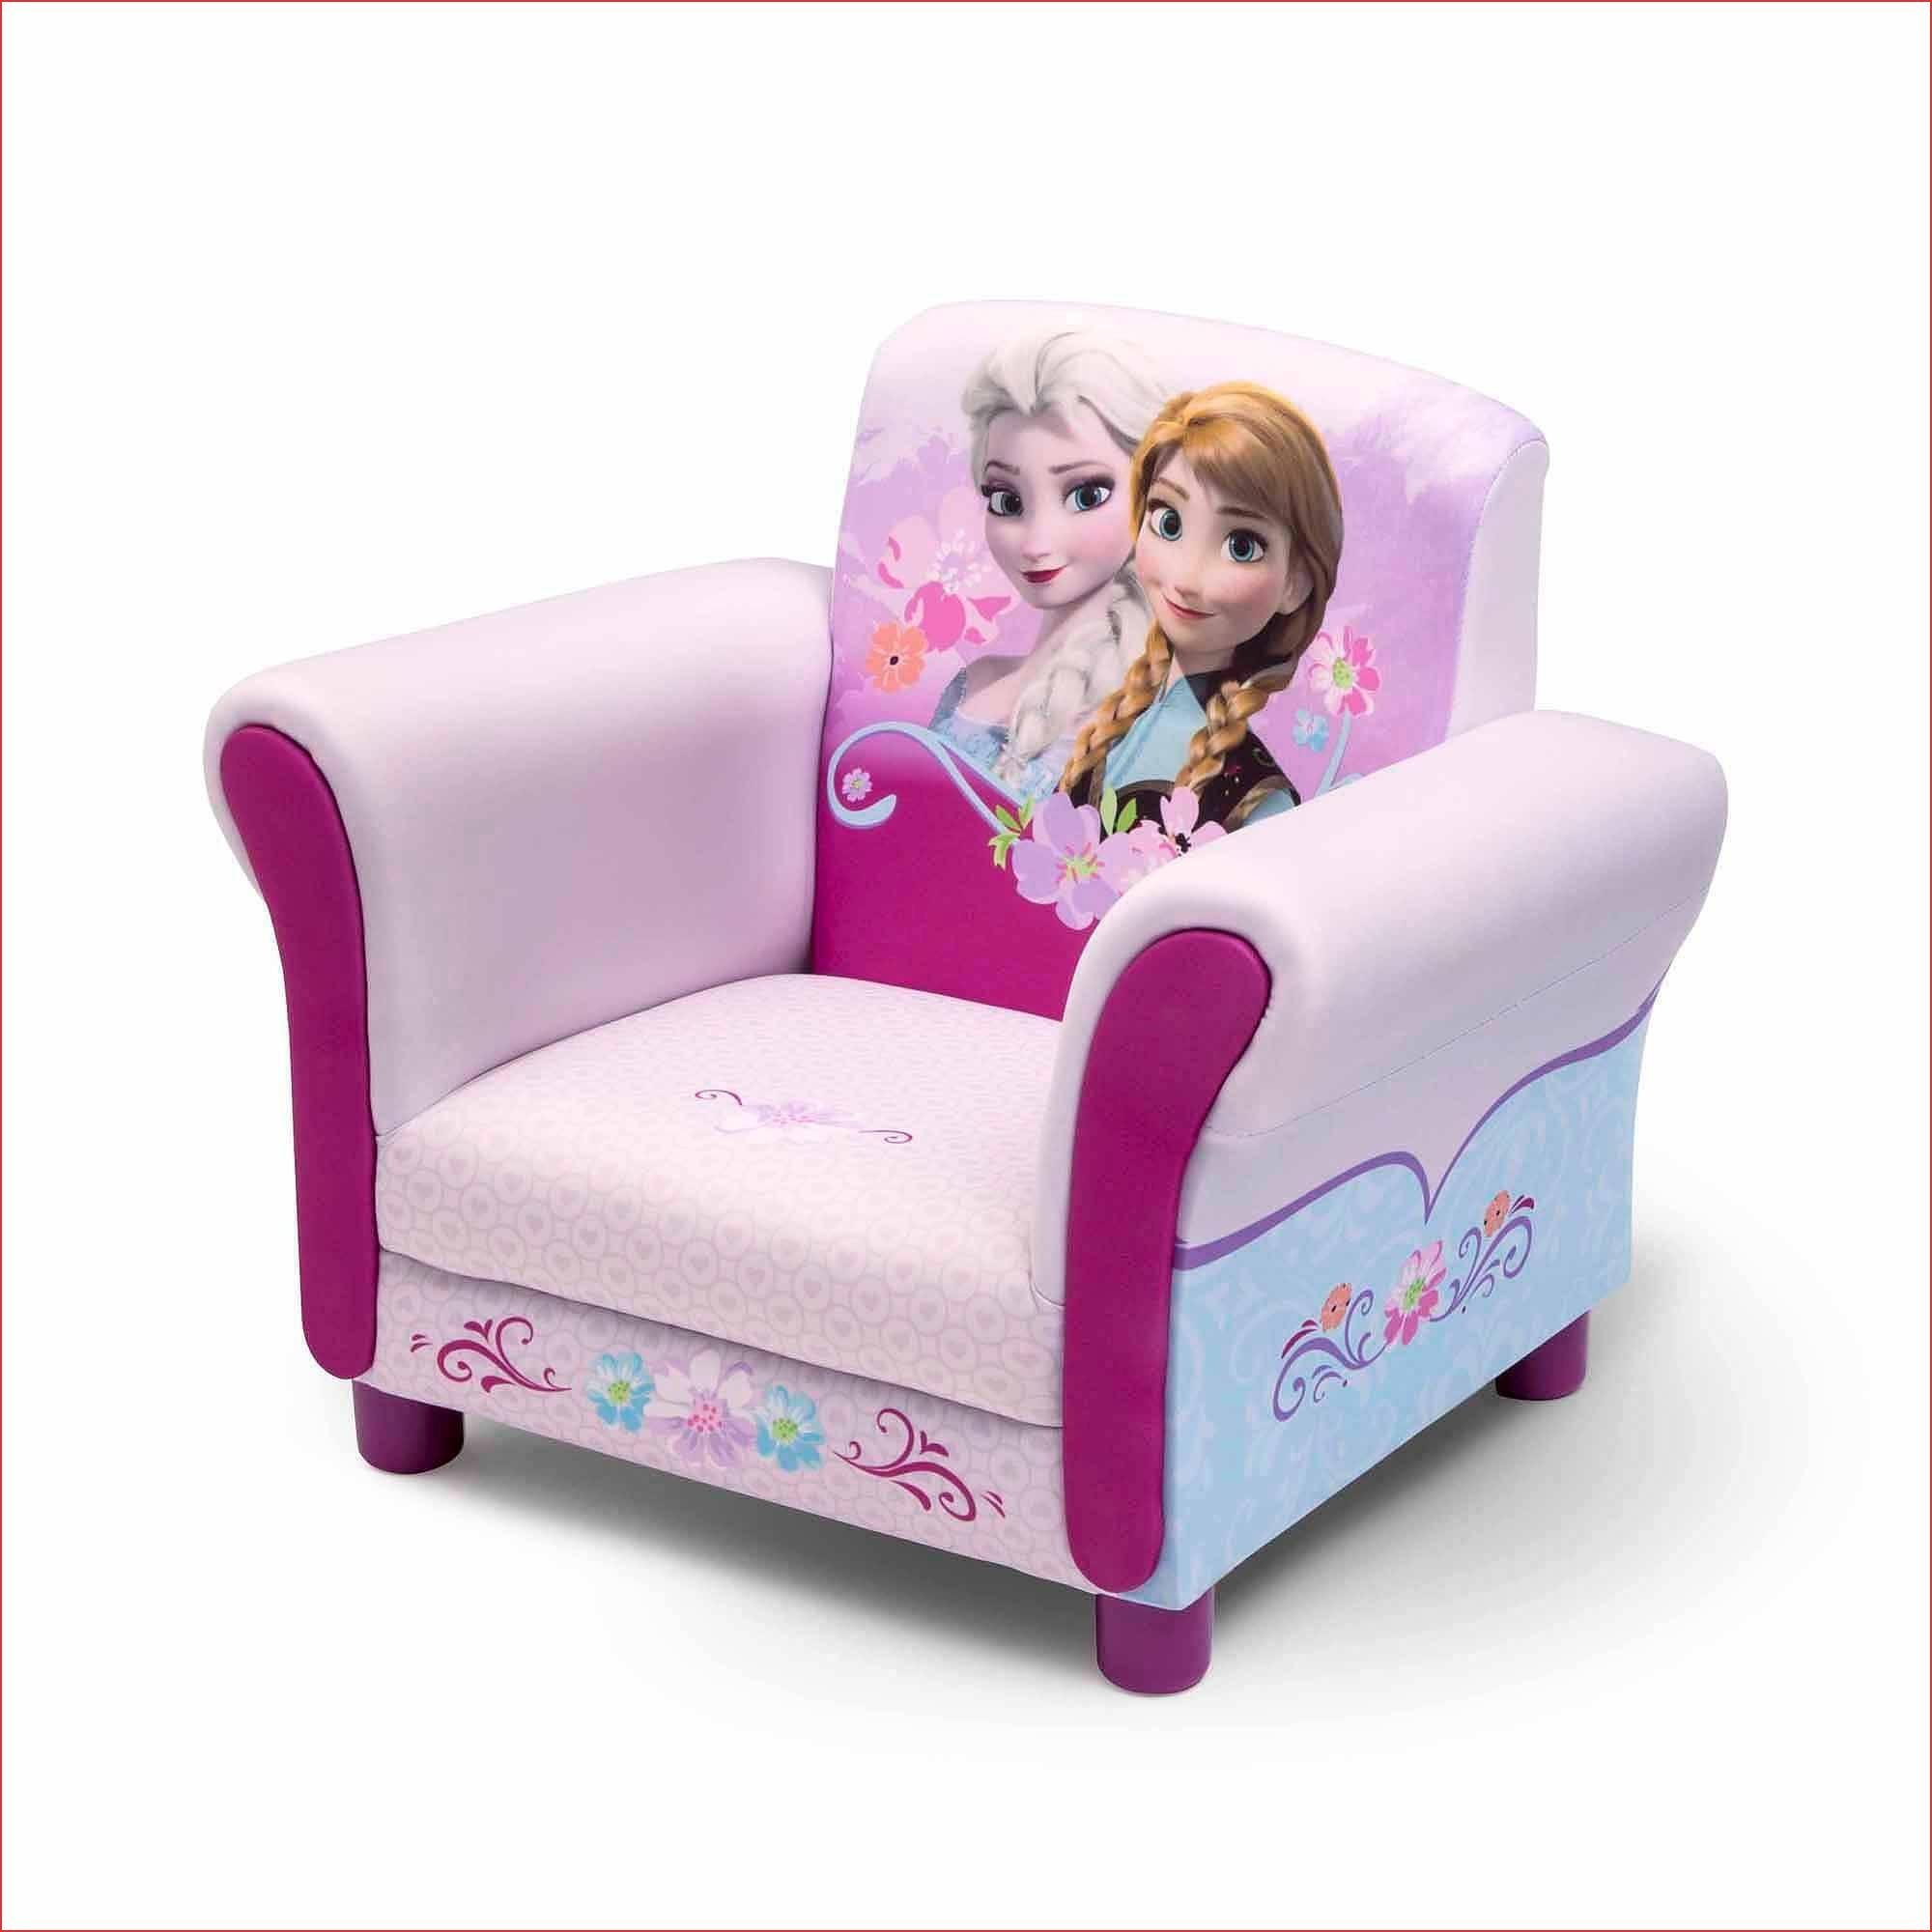 Personalized Kids Chair
 15 Collection of Personalized Kids Chairs and Sofas